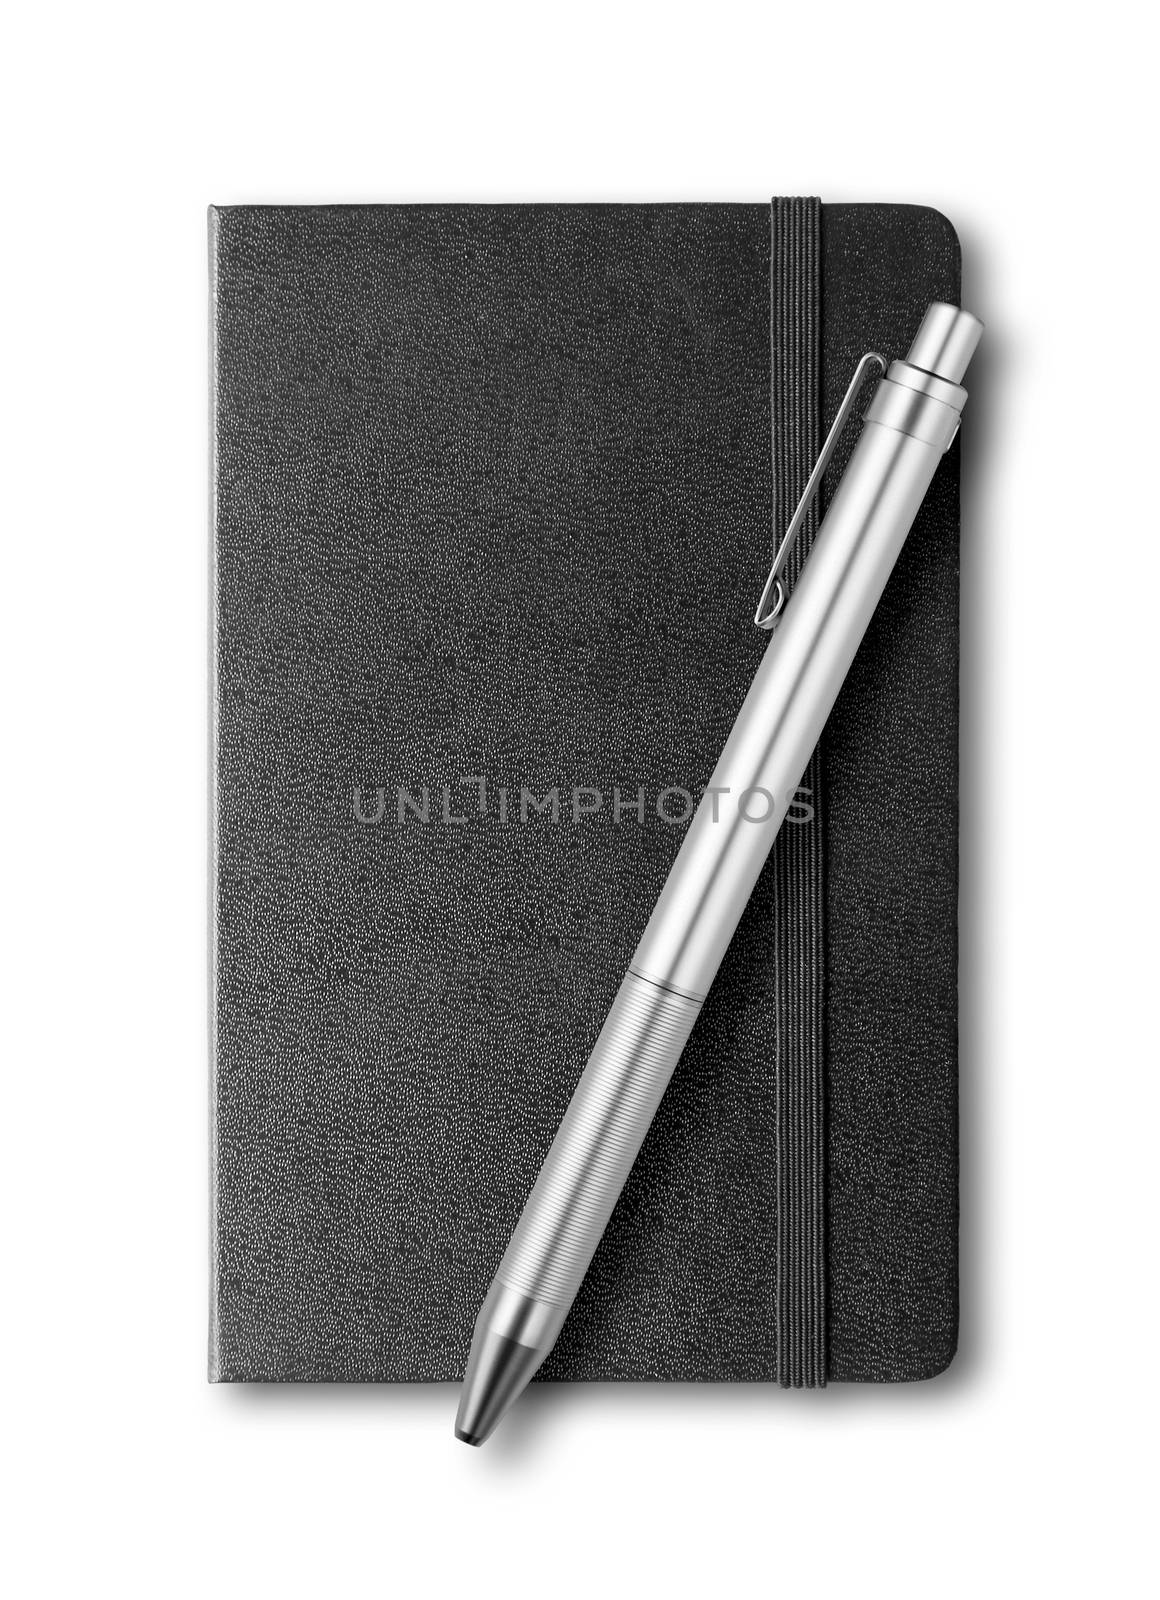 black closed notebook and pen mockup isolated on white